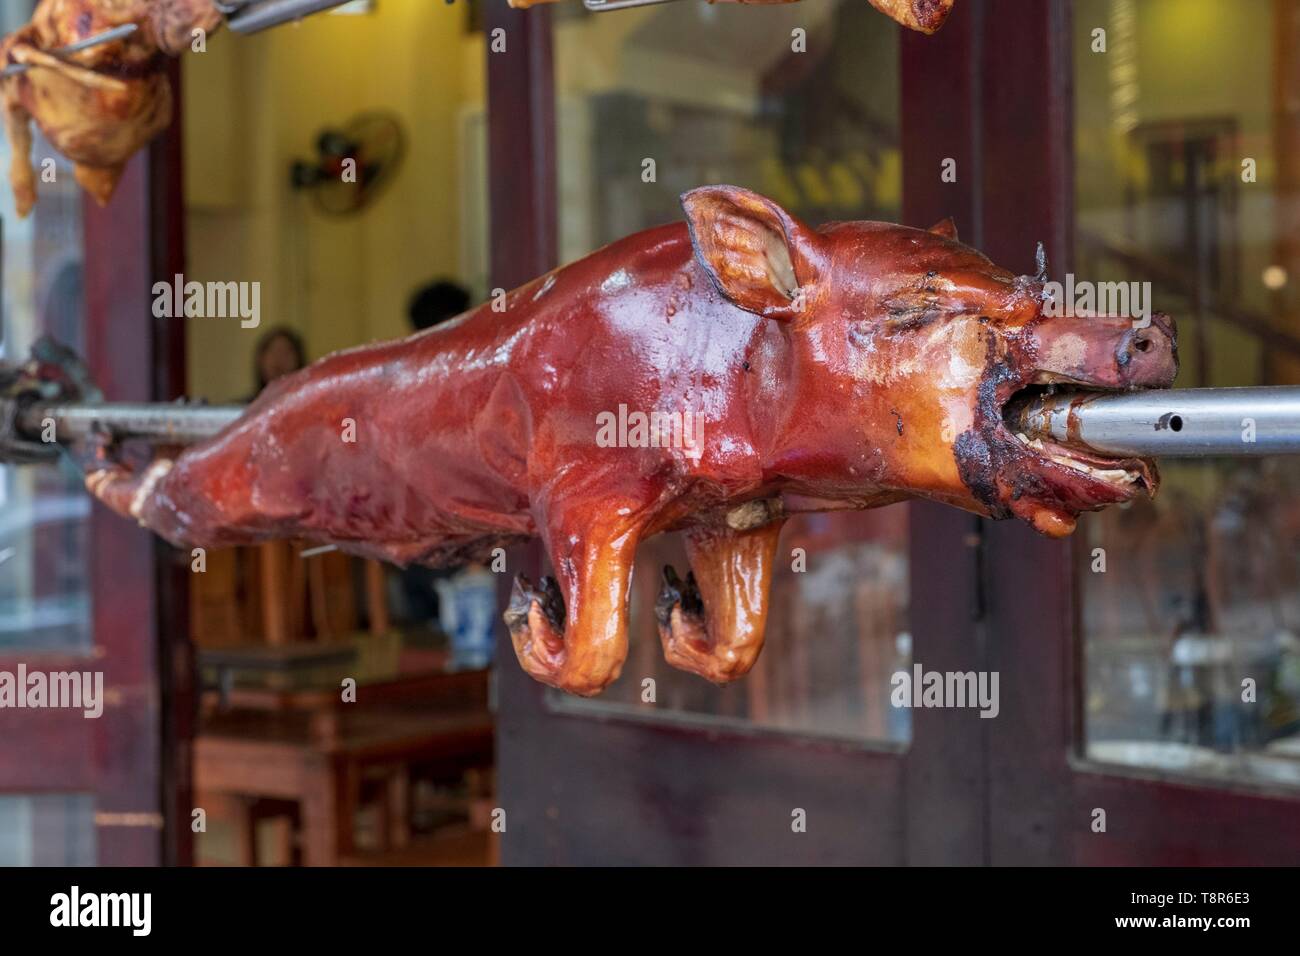 Vietnam, Lao Cai province, Sa Pa town, pig lacquered on a brooch Stock Photo